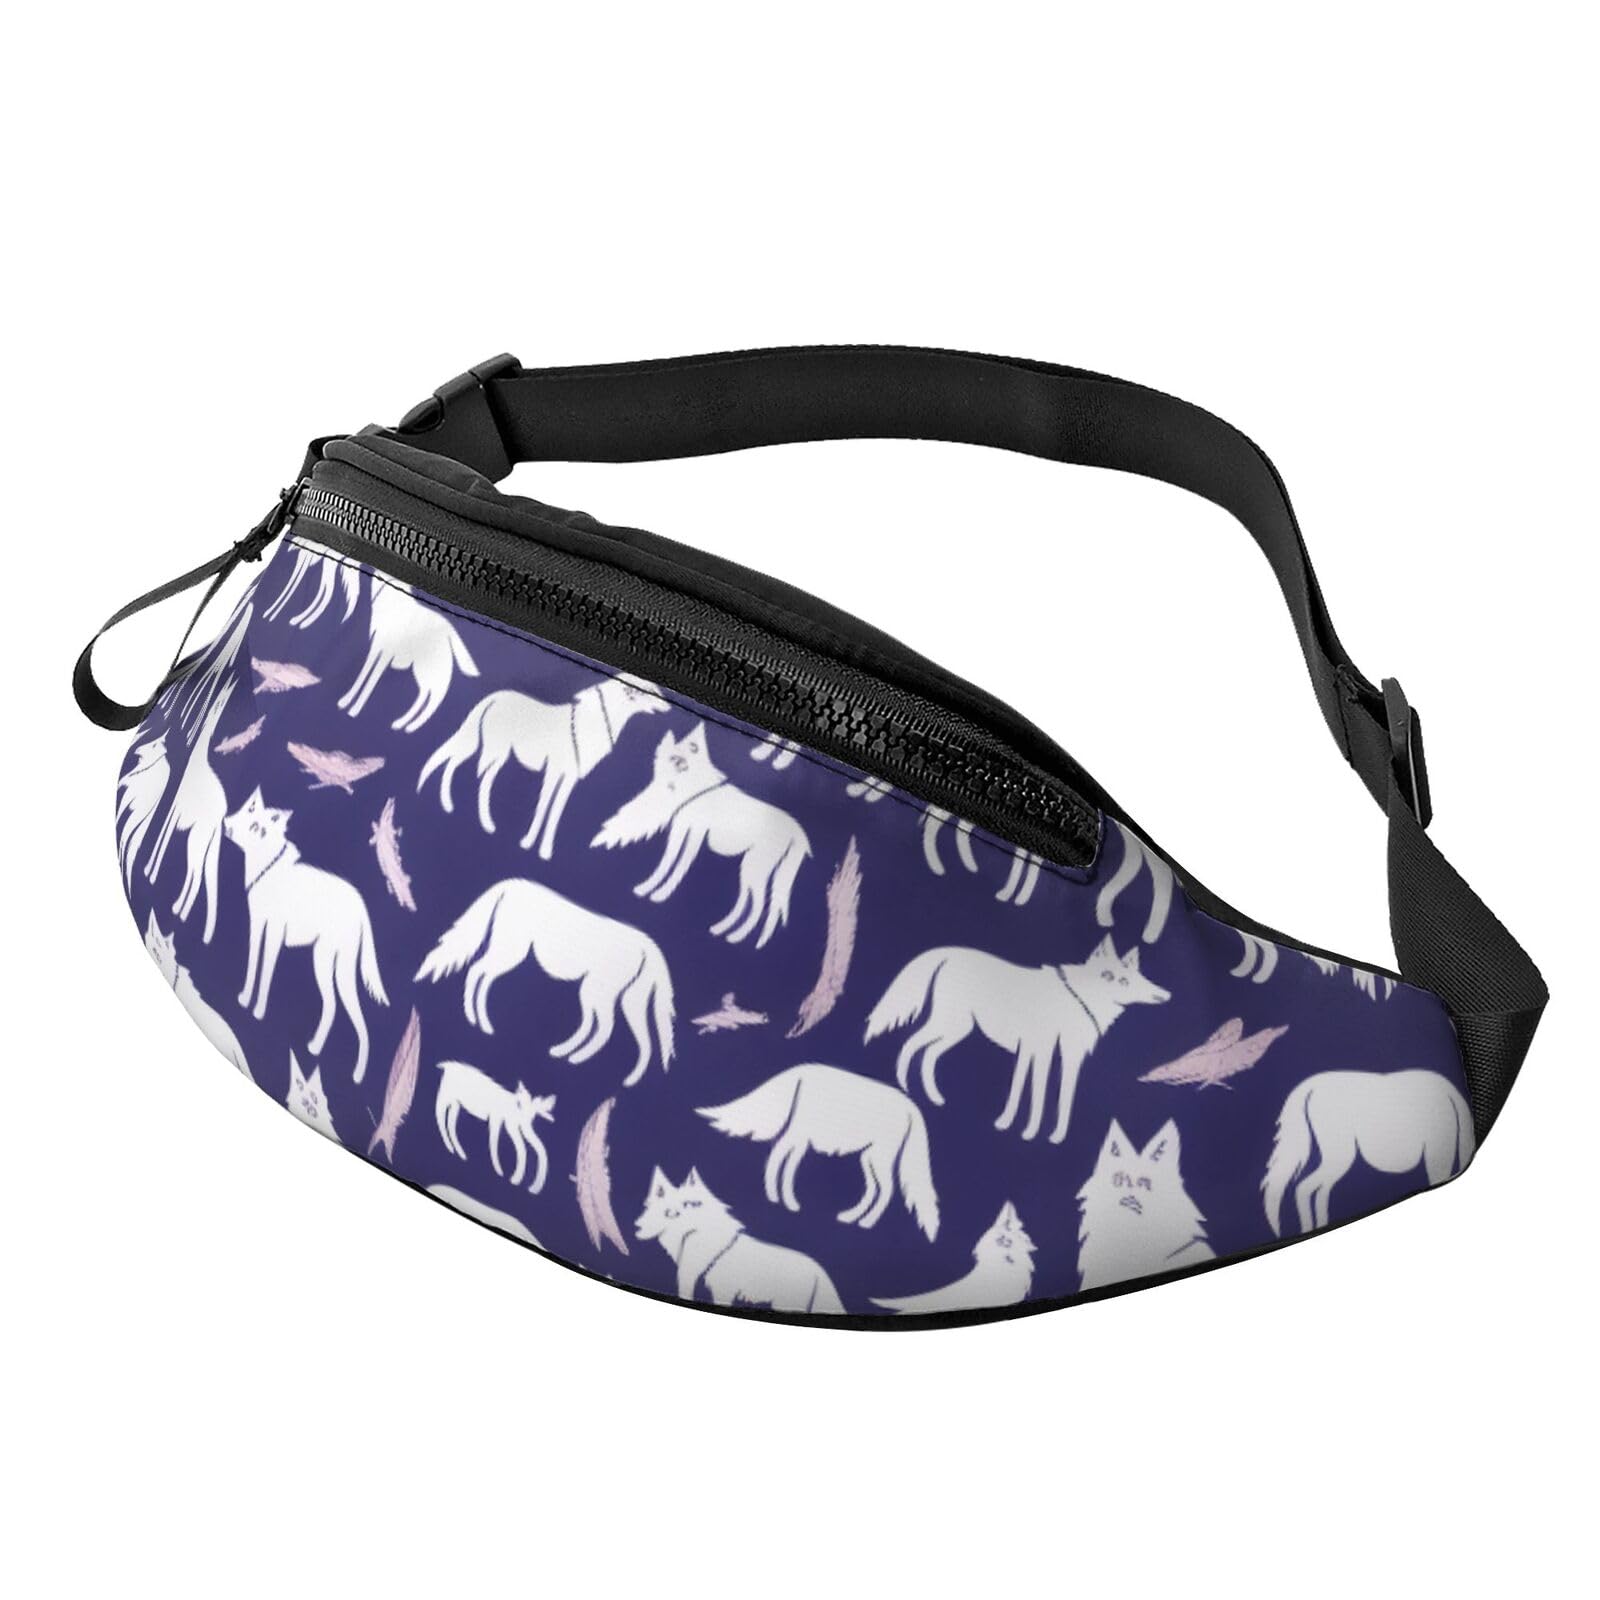 Wolf Pattern Fanny Pack For Women And Men Fashion Waist Bag With Adjustable Strap For Hiking Running Cycling